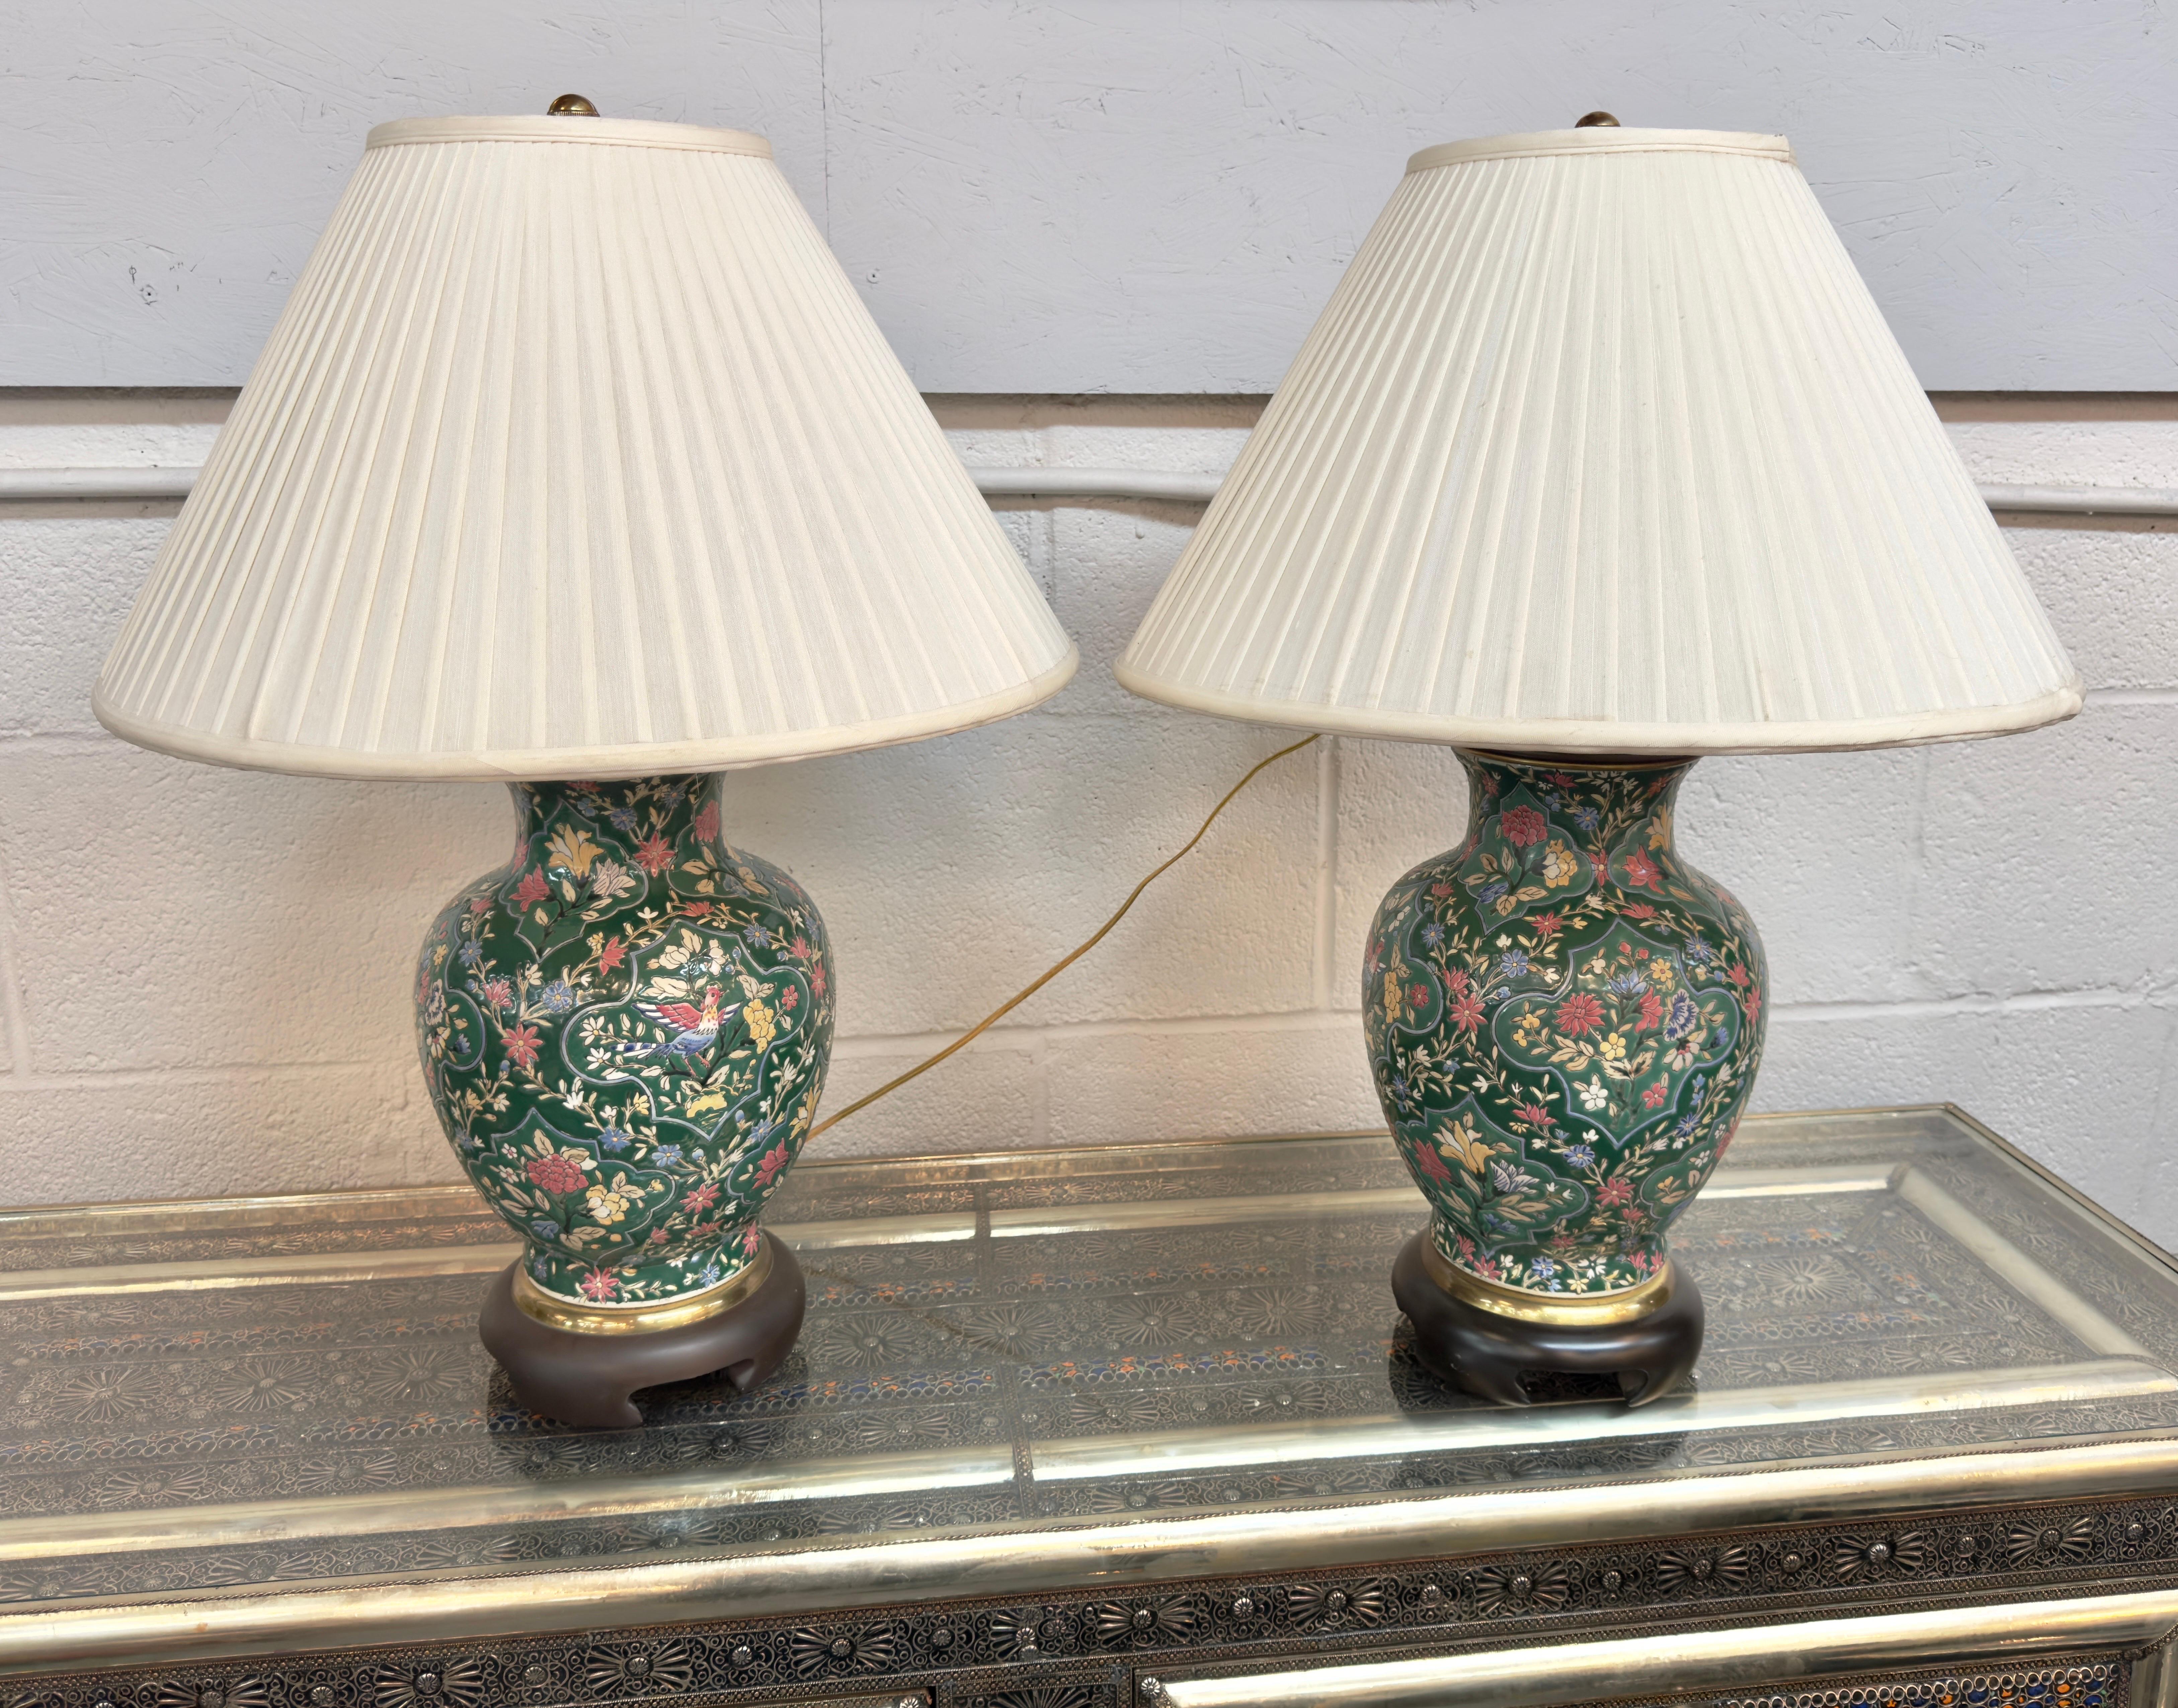 A pair of Frederick Cooper Chinoiserie style table lamps. Adorned with a captivating floral motif, each lamp boasts a bird motif in the center and is delicately hand-painted onto fine porcelain. The lush green hues, complemented by accents of serene